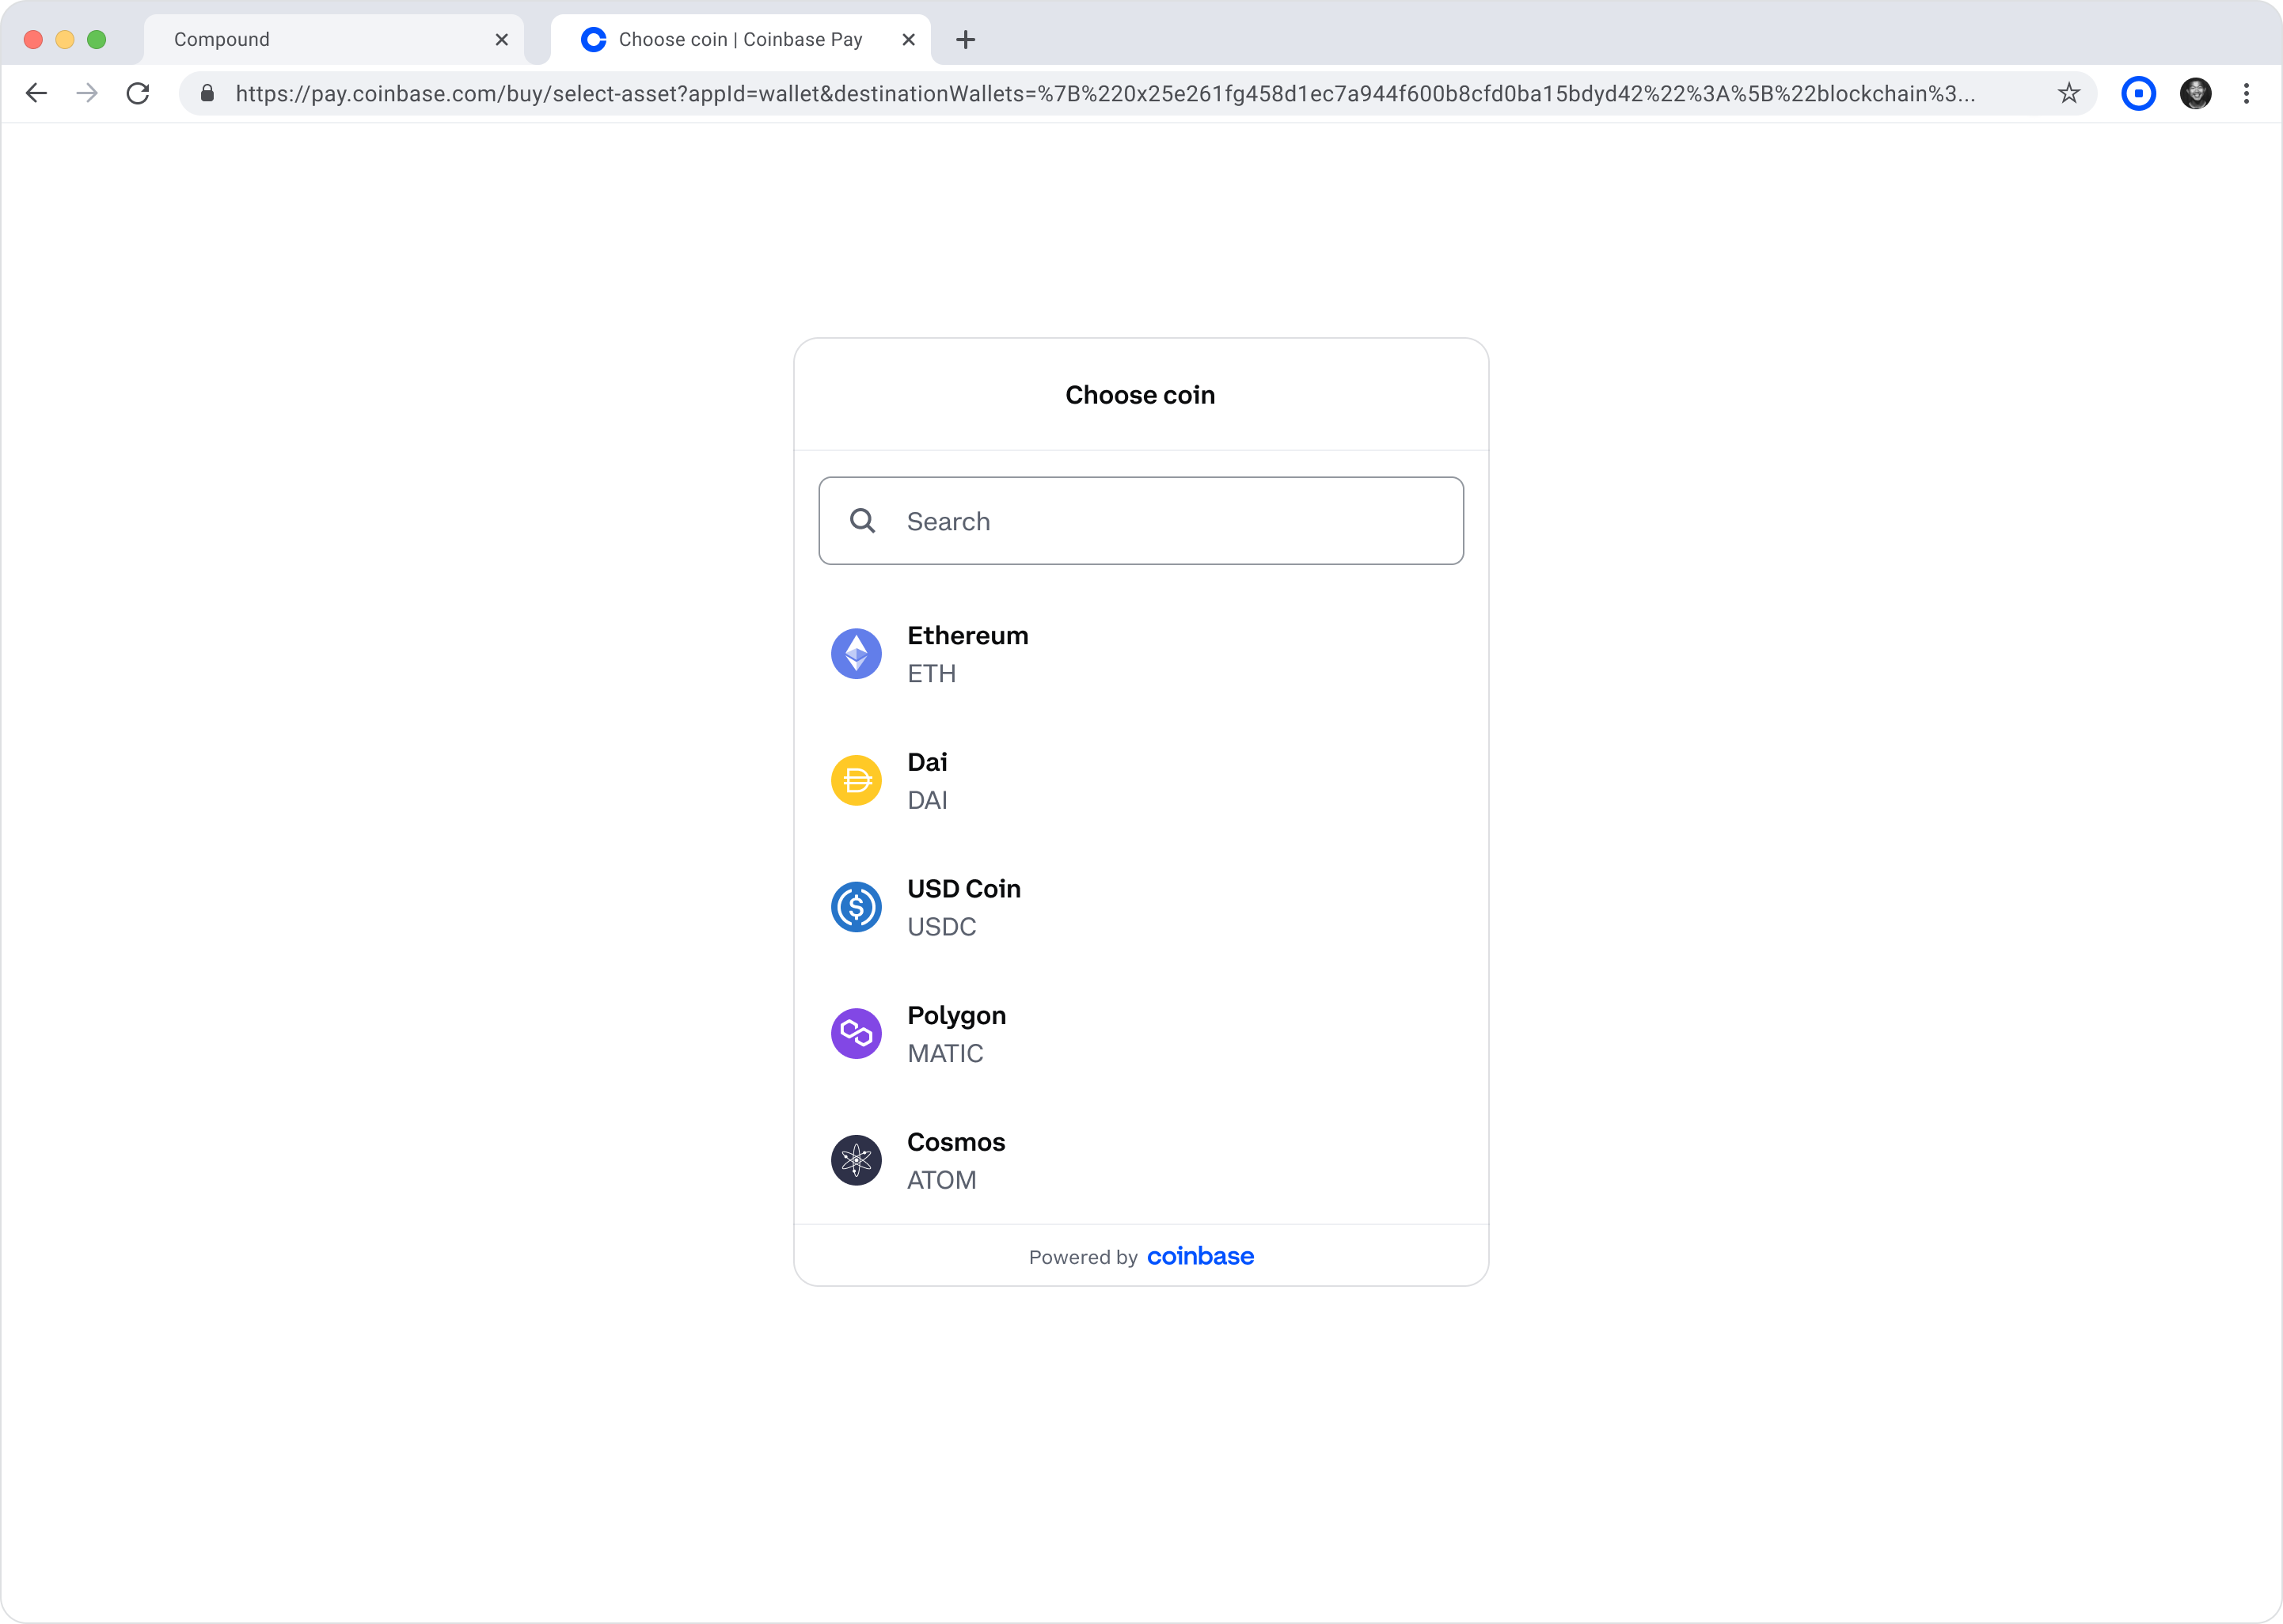 Coinbase Pay as a new tab in the browser.